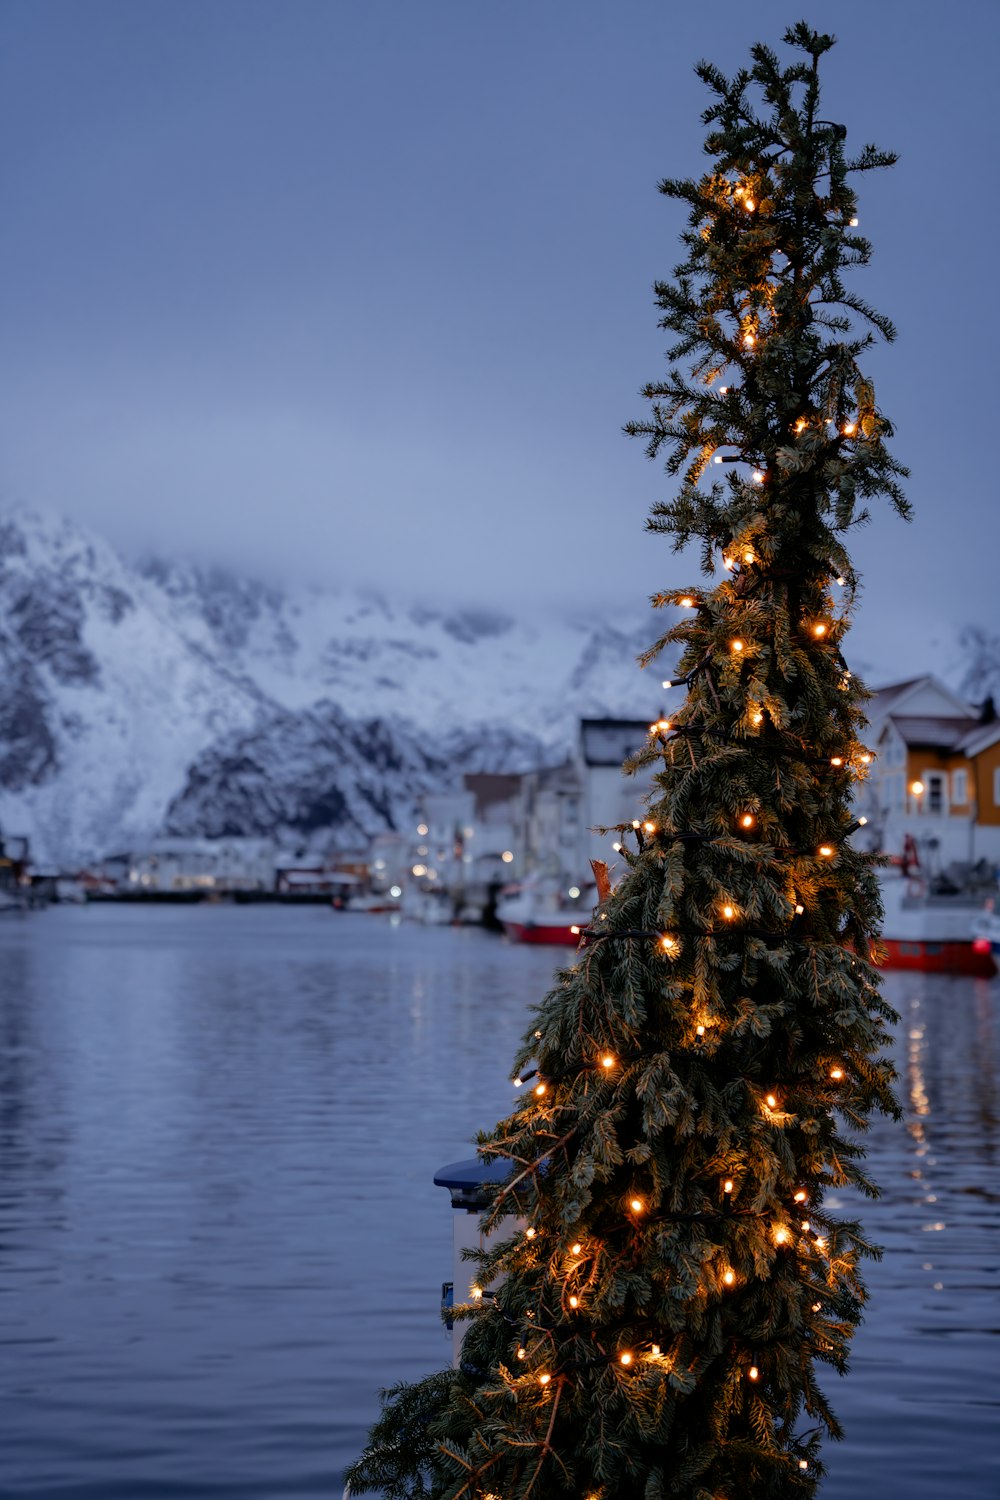 a christmas tree is lit up in front of a body of water